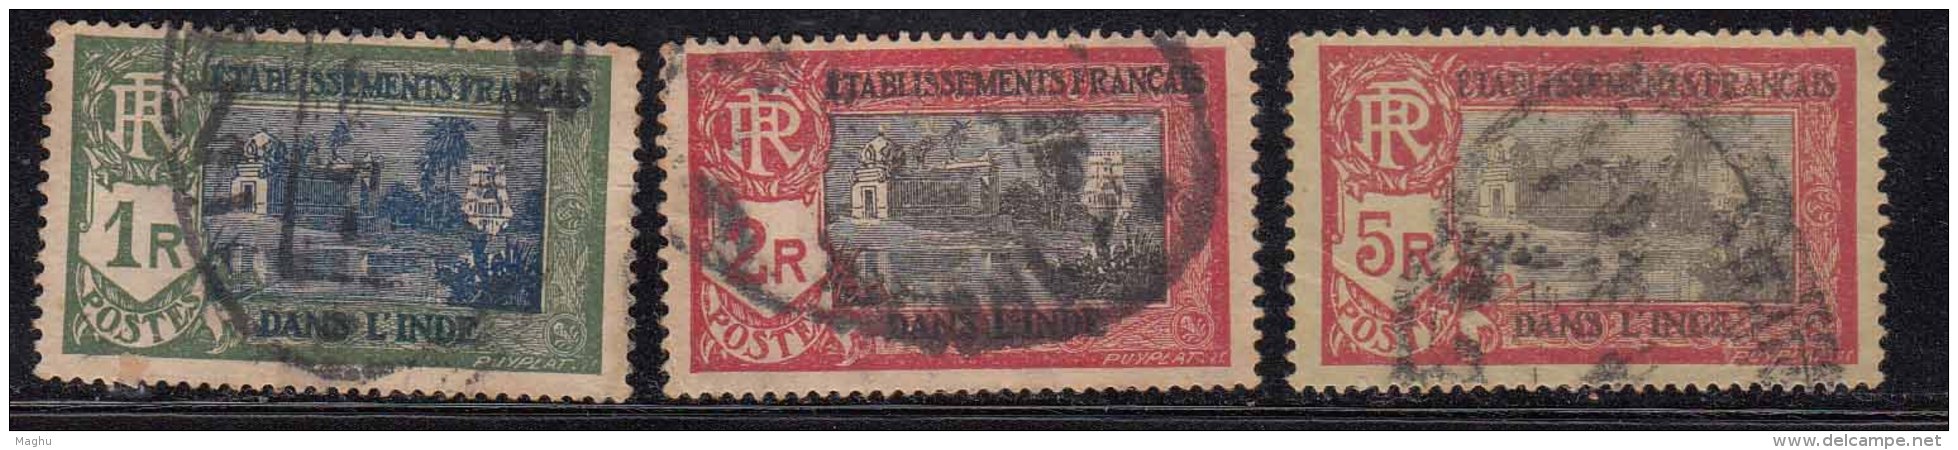 French India Used 1929, New Values Series, 3 Stamps, (Catalog App., 12.00 Pounds) - Used Stamps